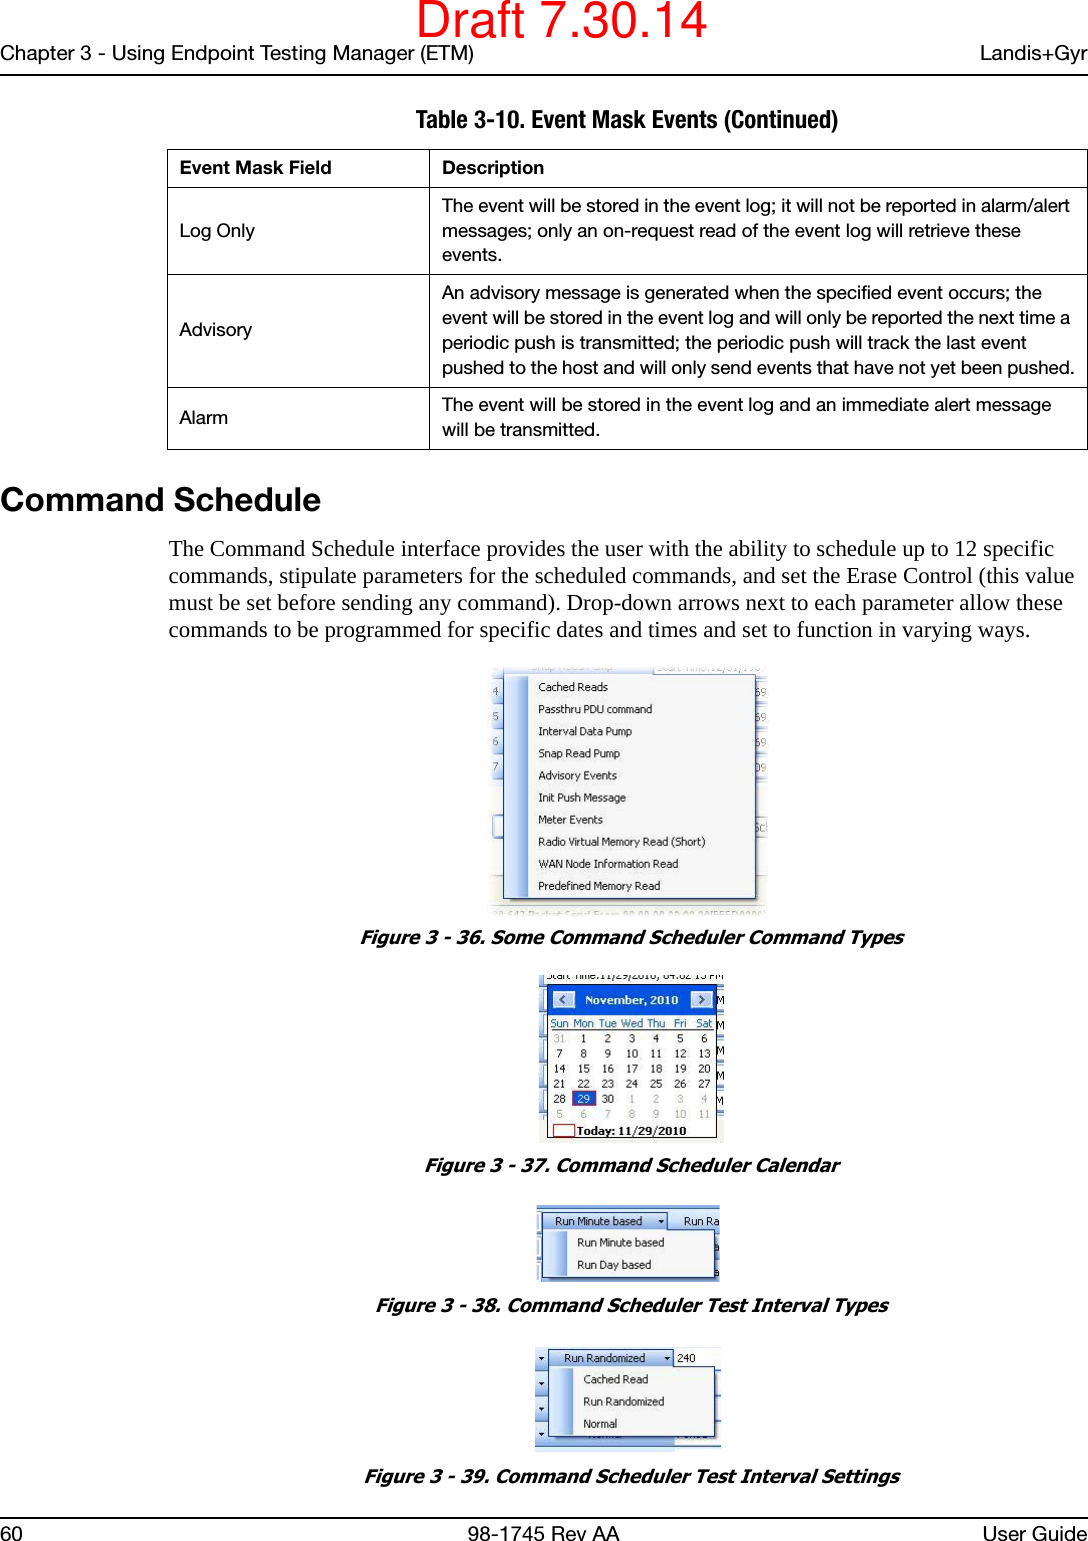 Chapter 3 - Using Endpoint Testing Manager (ETM) Landis+Gyr60 98-1745 Rev AA User GuideCommand ScheduleThe Command Schedule interface provides the user with the ability to schedule up to 12 specific commands, stipulate parameters for the scheduled commands, and set the Erase Control (this value must be set before sending any command). Drop-down arrows next to each parameter allow these commands to be programmed for specific dates and times and set to function in varying ways. Figure 3 - 36. Some Command Scheduler Command Types Figure 3 - 37. Command Scheduler Calendar Figure 3 - 38. Command Scheduler Test Interval Types Figure 3 - 39. Command Scheduler Test Interval SettingsLog OnlyThe event will be stored in the event log; it will not be reported in alarm/alert messages; only an on-request read of the event log will retrieve these events.Advisory An advisory message is generated when the specified event occurs; the event will be stored in the event log and will only be reported the next time a periodic push is transmitted; the periodic push will track the last event pushed to the host and will only send events that have not yet been pushed.Alarm The event will be stored in the event log and an immediate alert message will be transmitted.Table 3-10. Event Mask Events (Continued)Event Mask Field DescriptionDraft 7.30.14